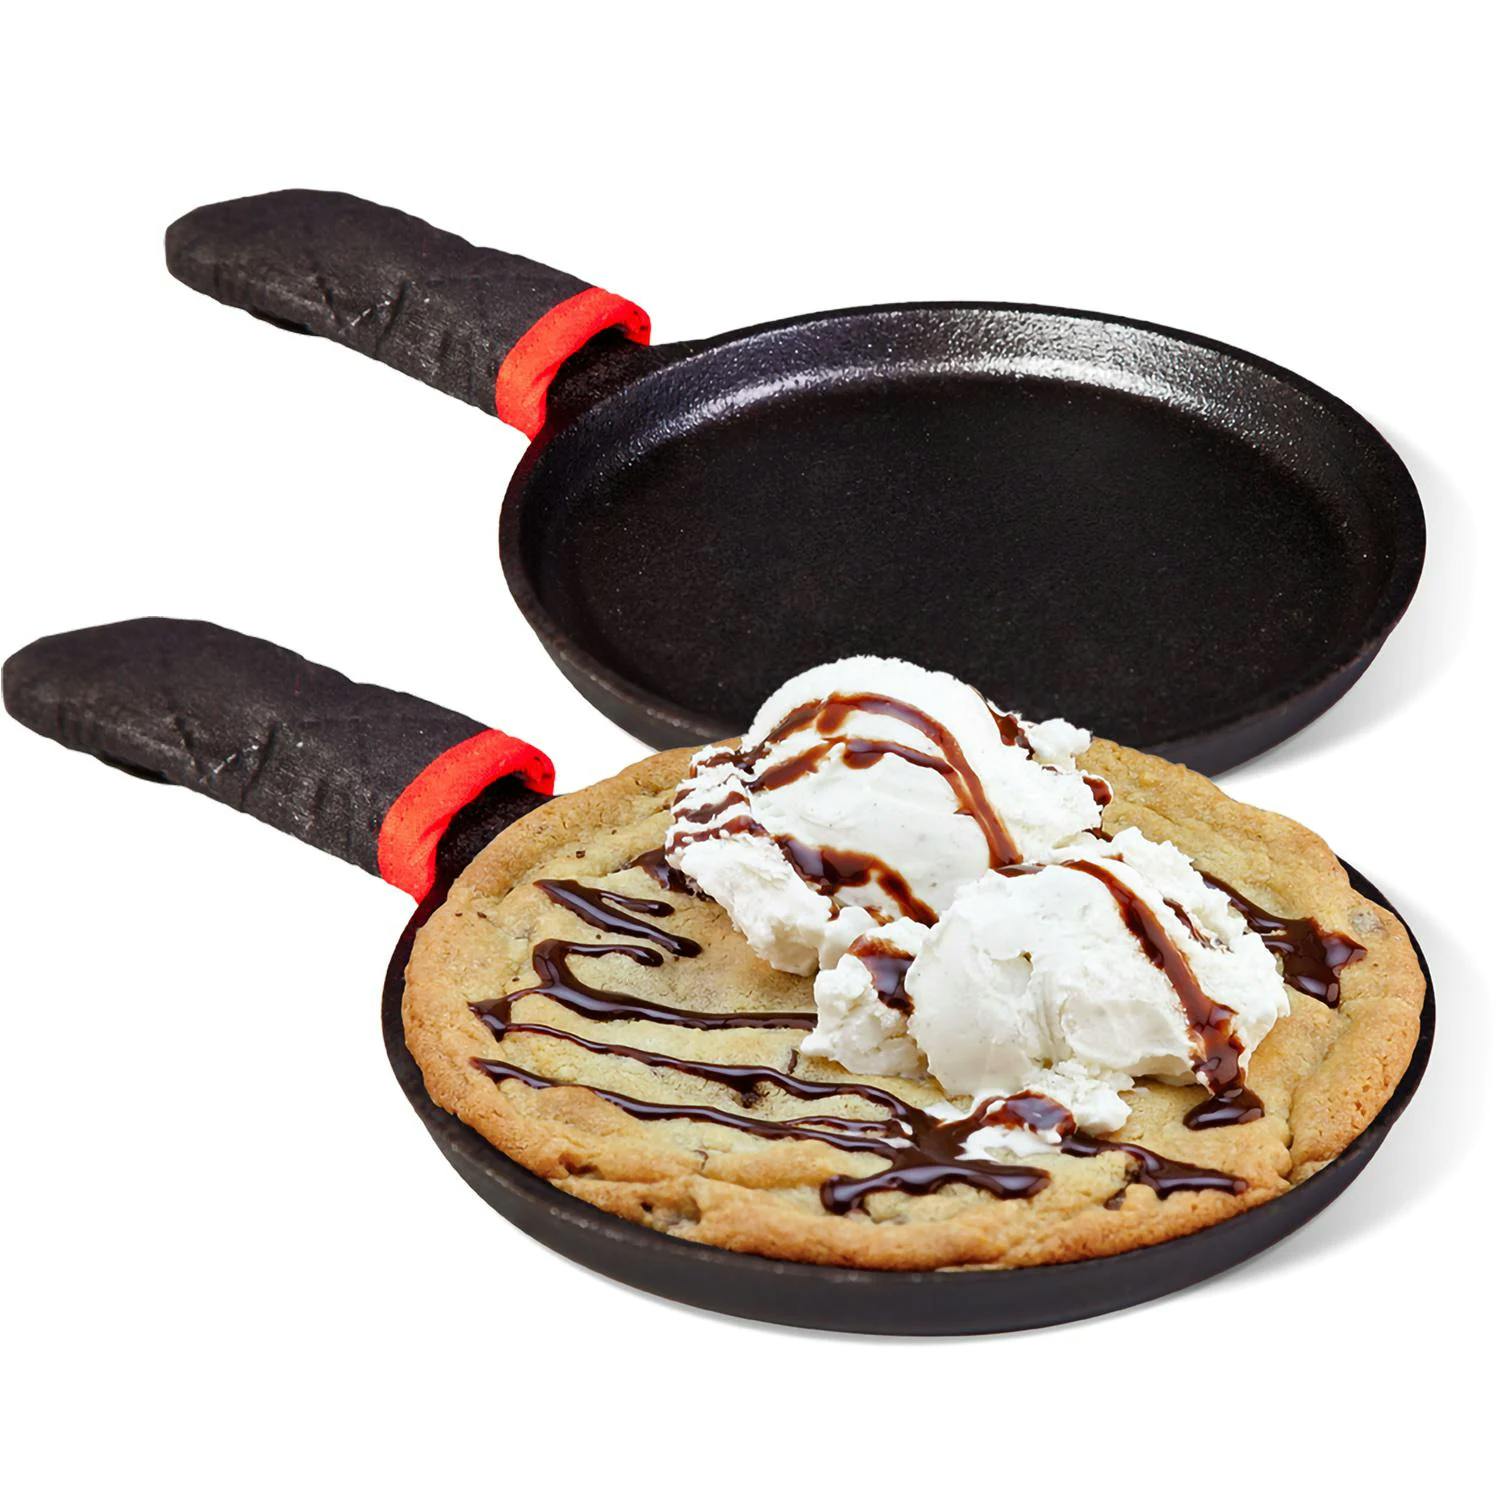 Camp Chef Skookie Mini Skillet 2 Pack with Grip Handles and Chocolate Chip Cookie Mix